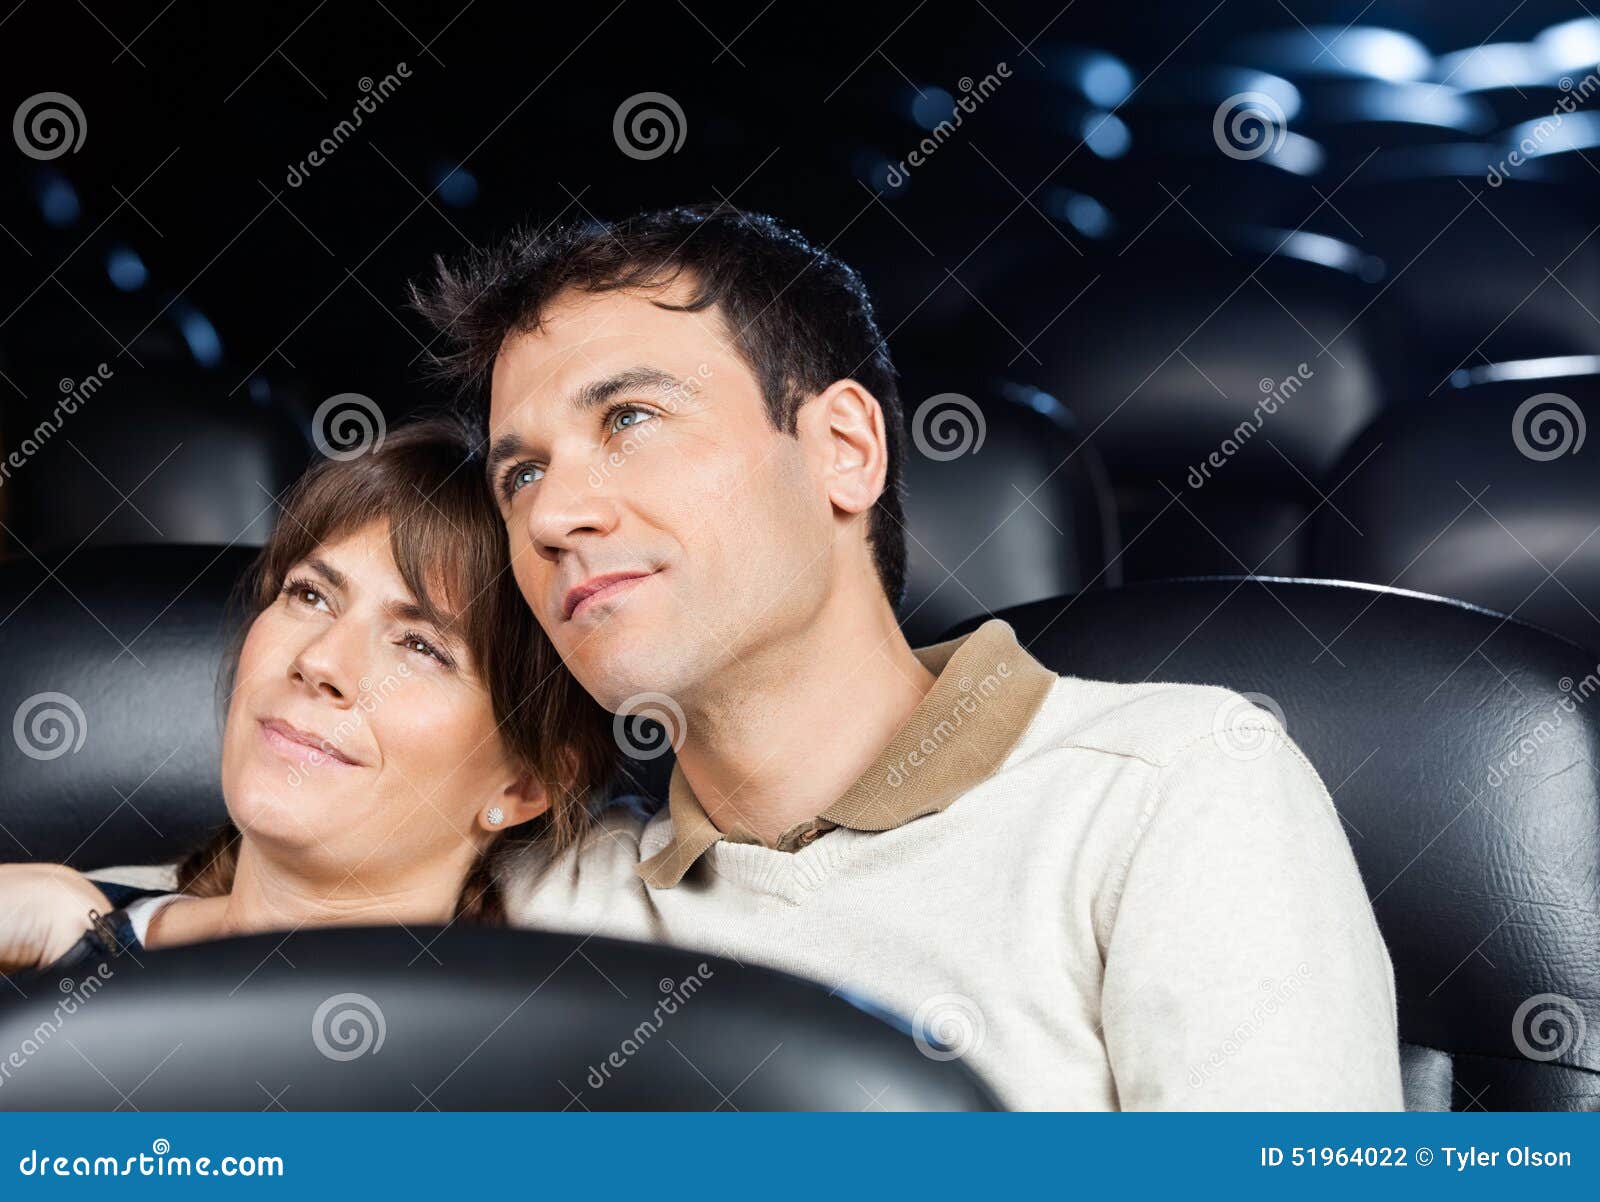 Adult theater couples